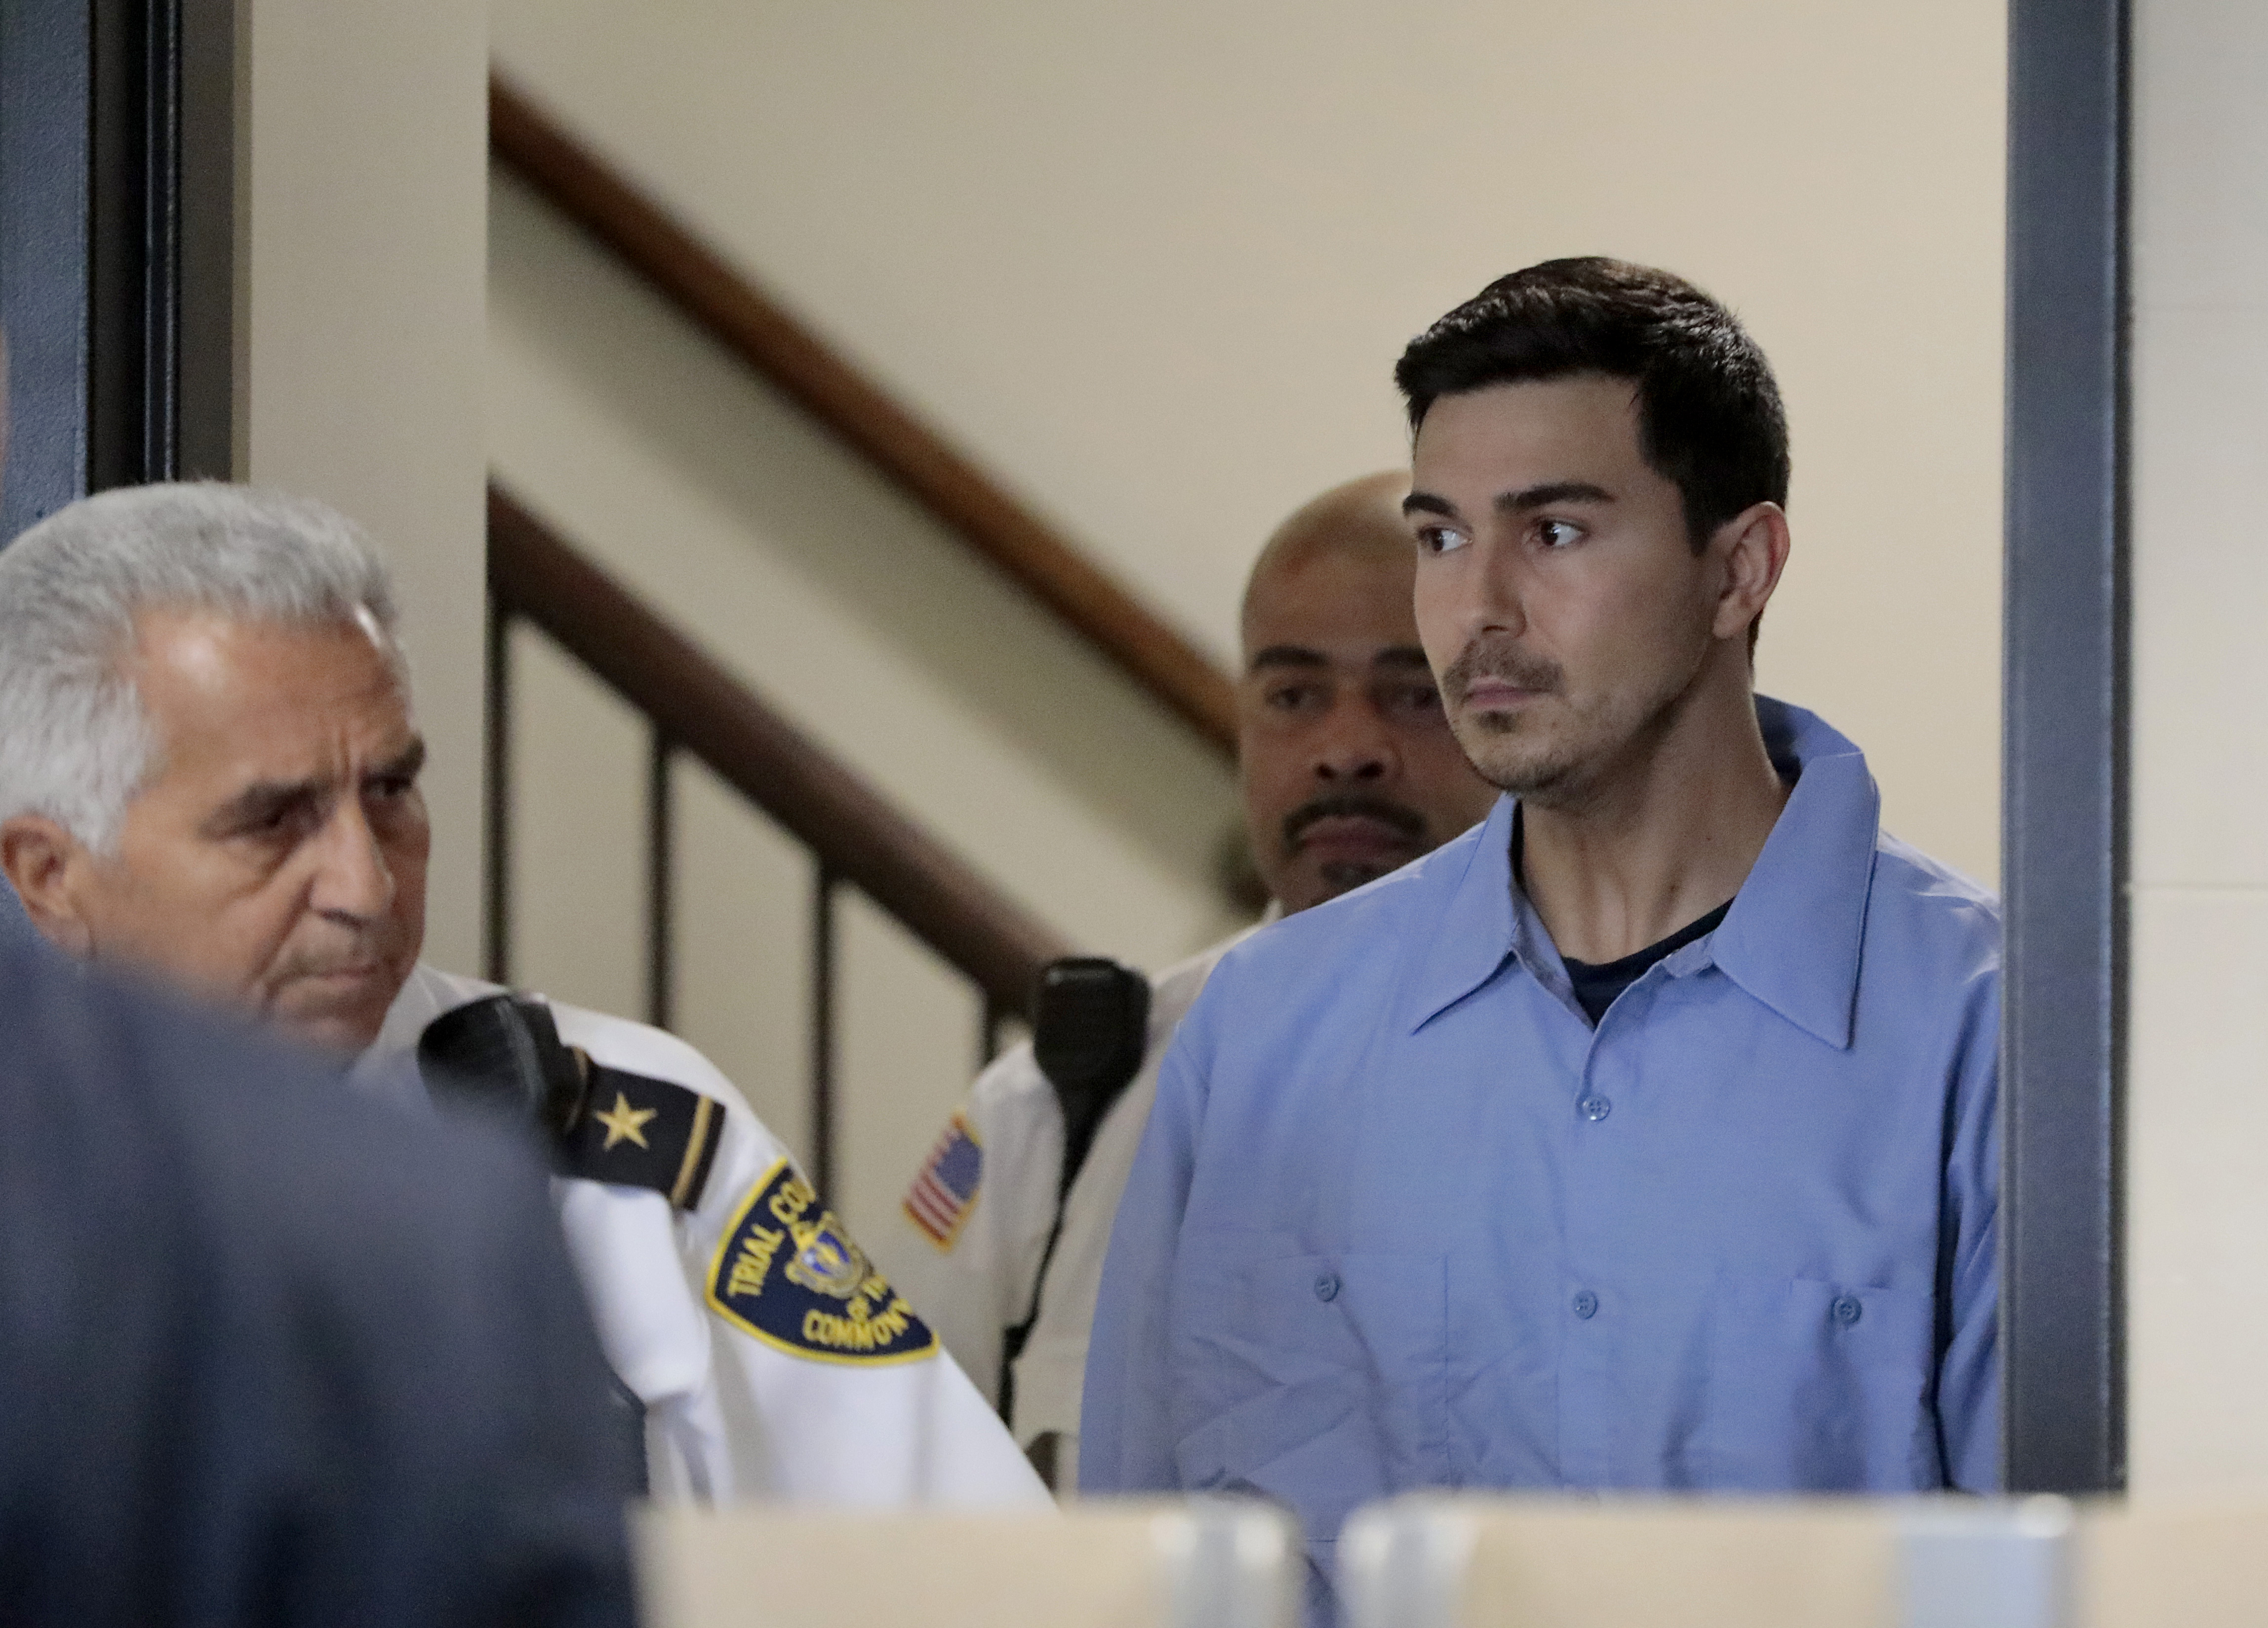 Matthew Nilo pleads not guilty to rape charges in Boston court